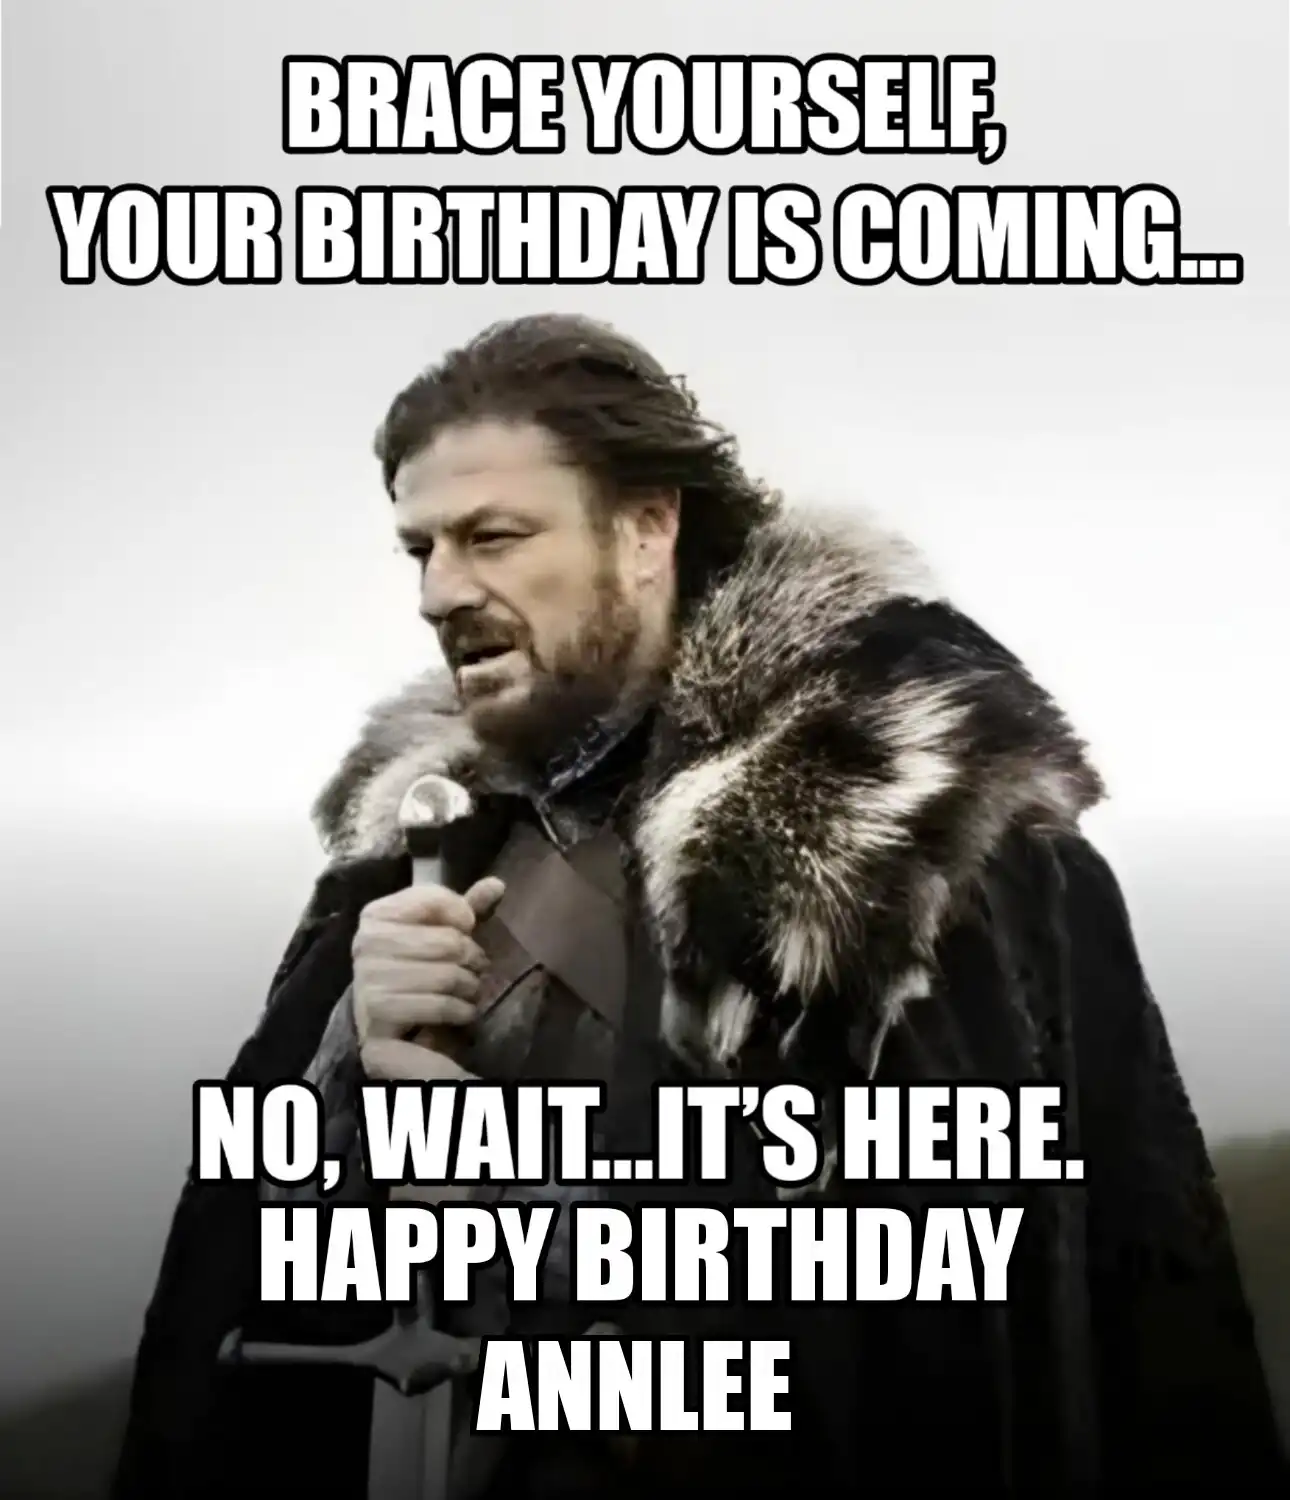 Happy Birthday Annlee Brace Yourself Your Birthday Is Coming Meme